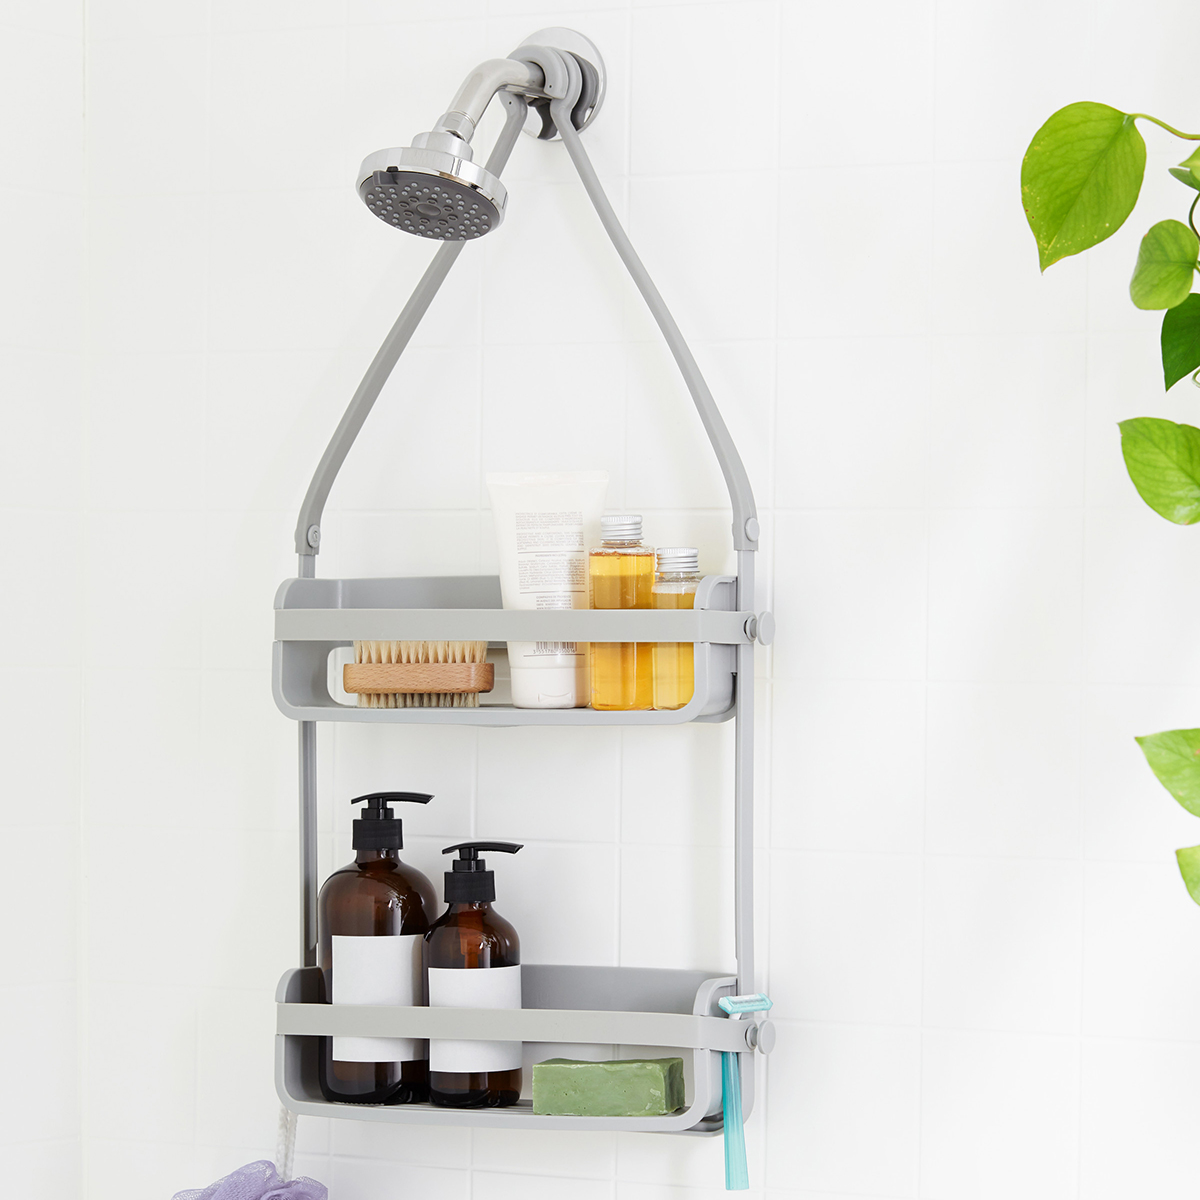 Umbra Grey Flex Shower Caddy | The Container Store